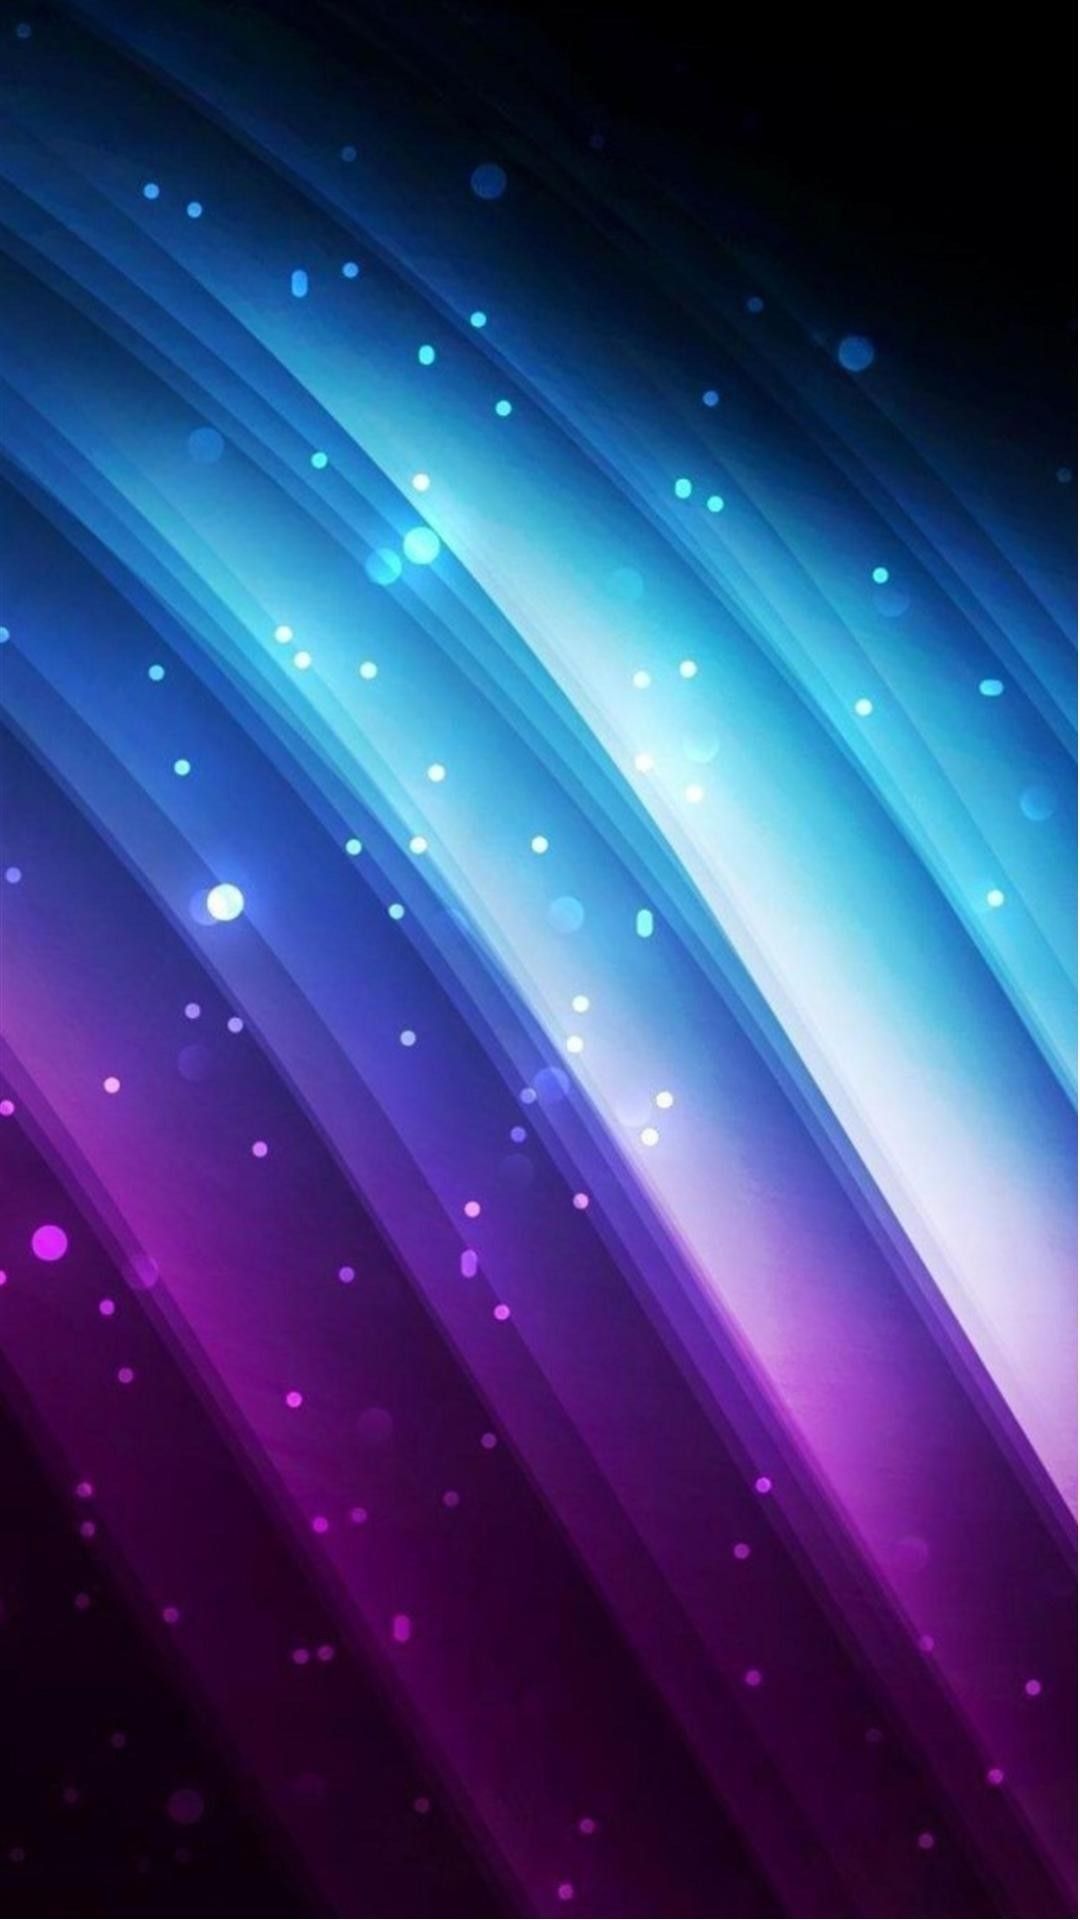 Free Mobile Wallpapers Themes Cool Backgrounds For Your Cell Phone